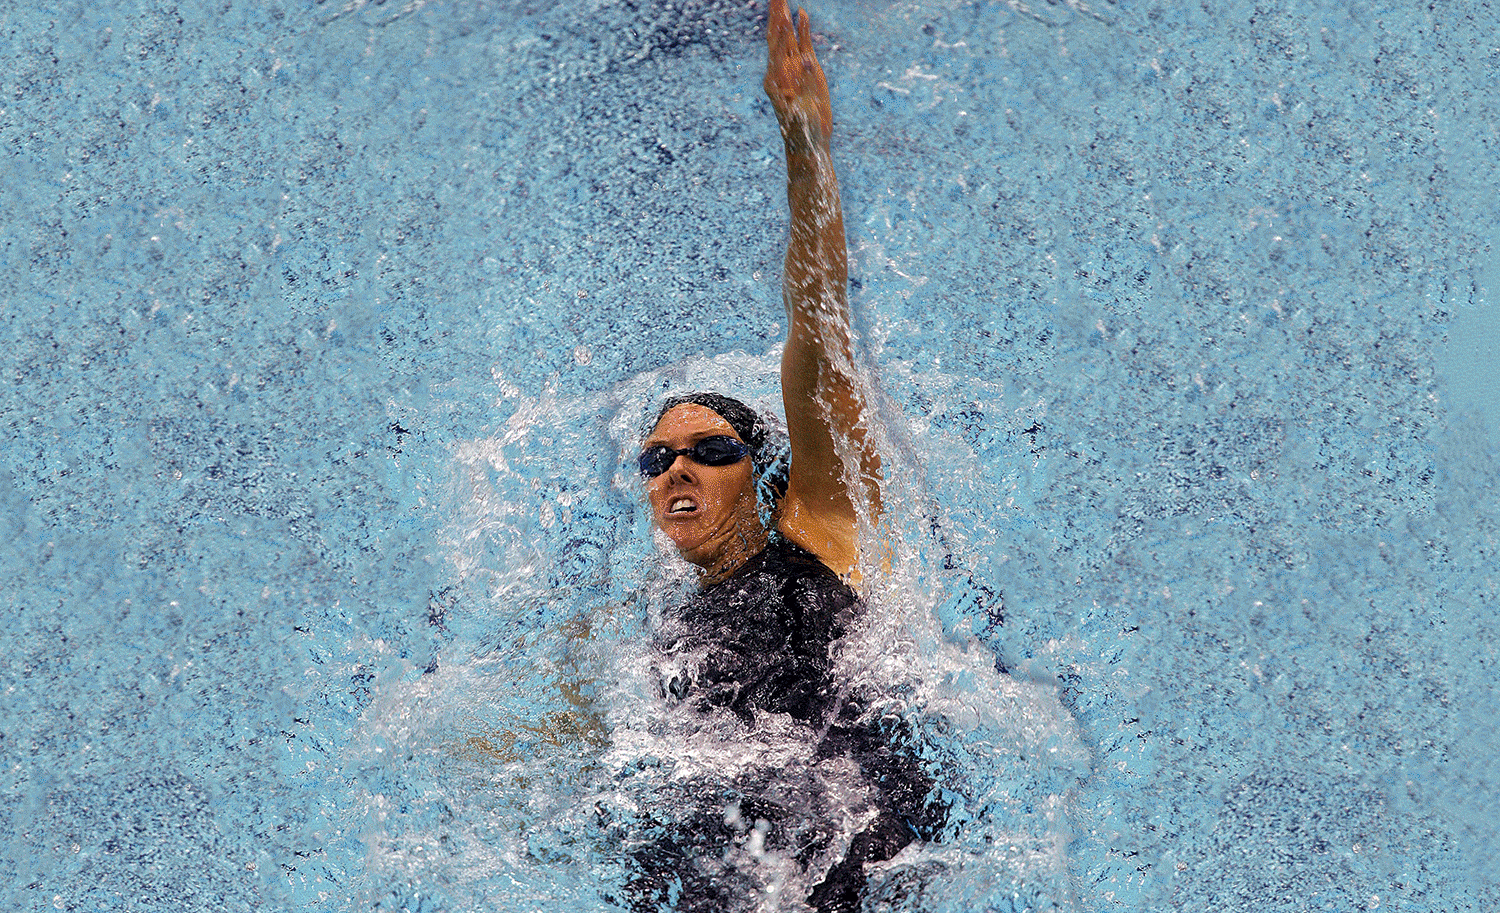 Trischa Zorn does the backstroke in a pool as 41 gold medals and some silver and bronze medals appear in the background one by one.